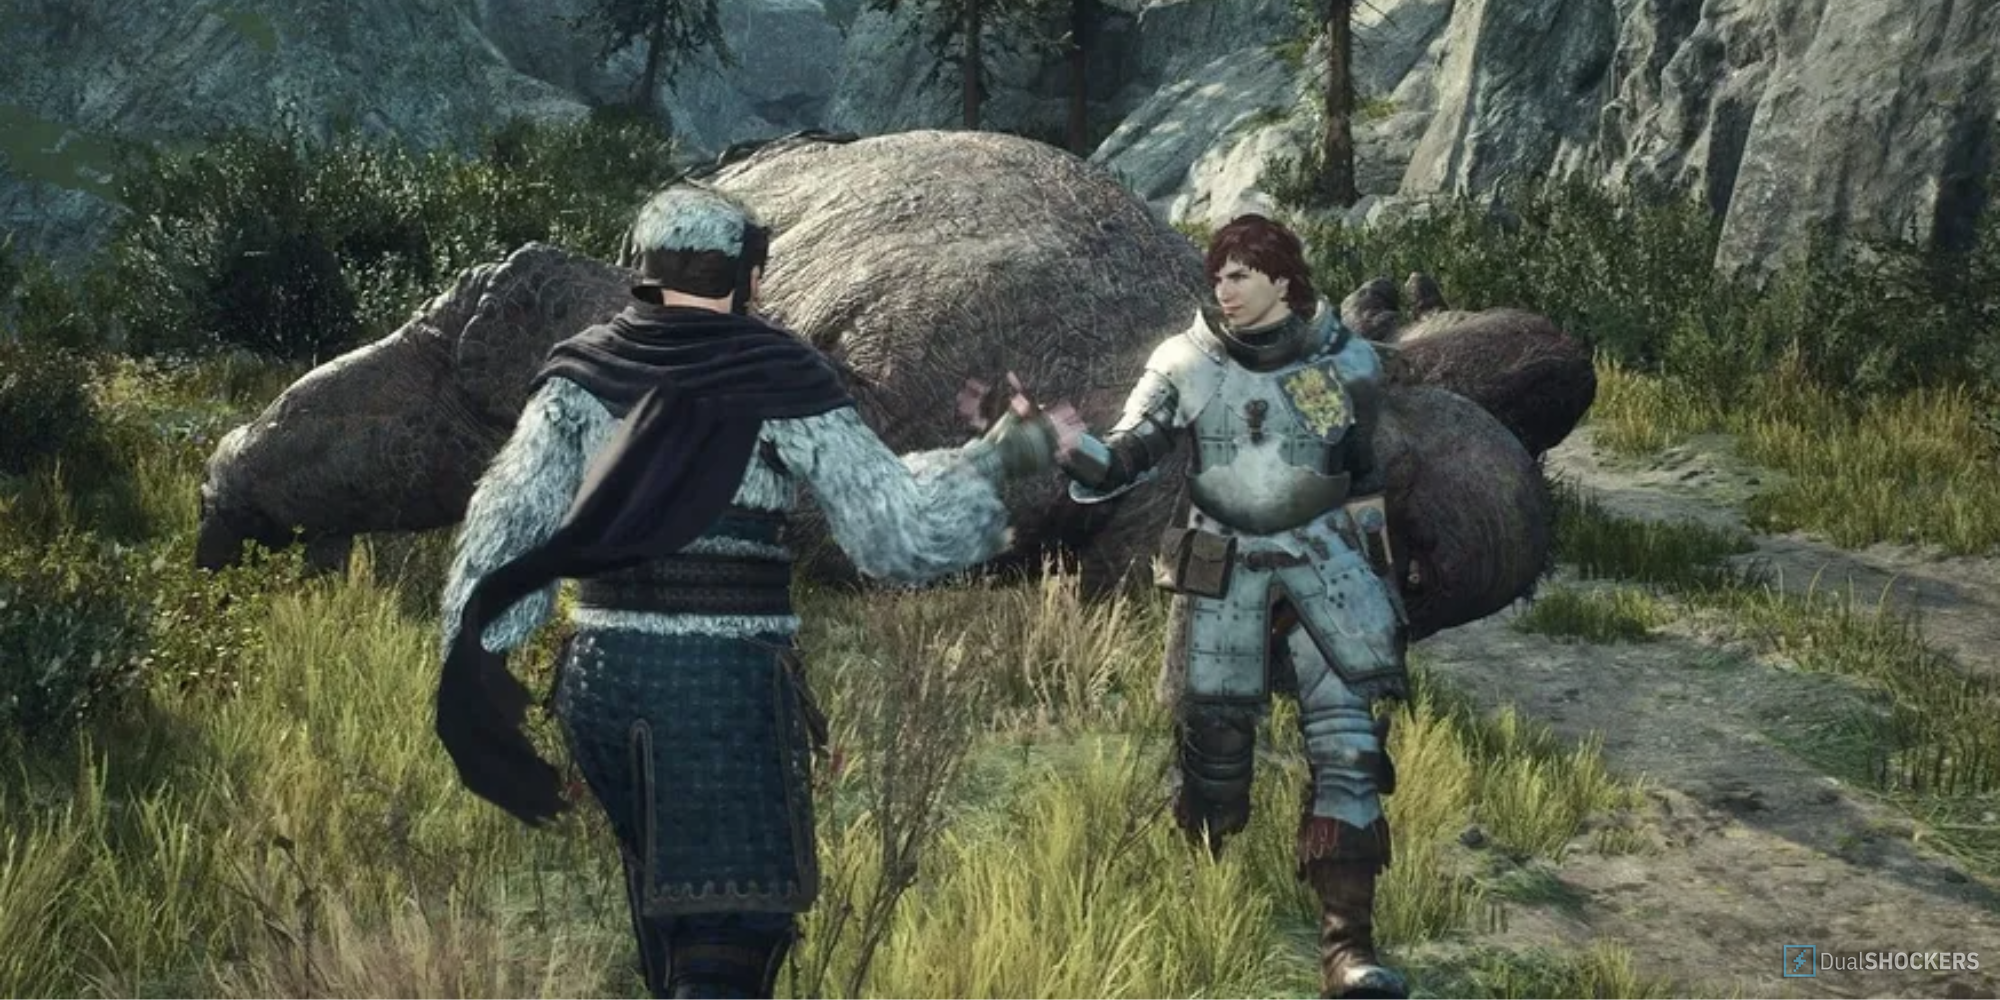 Dragon's Dogma 2 Allows Players To Dispose Of Annoying NPCs In The Most Brutal Way